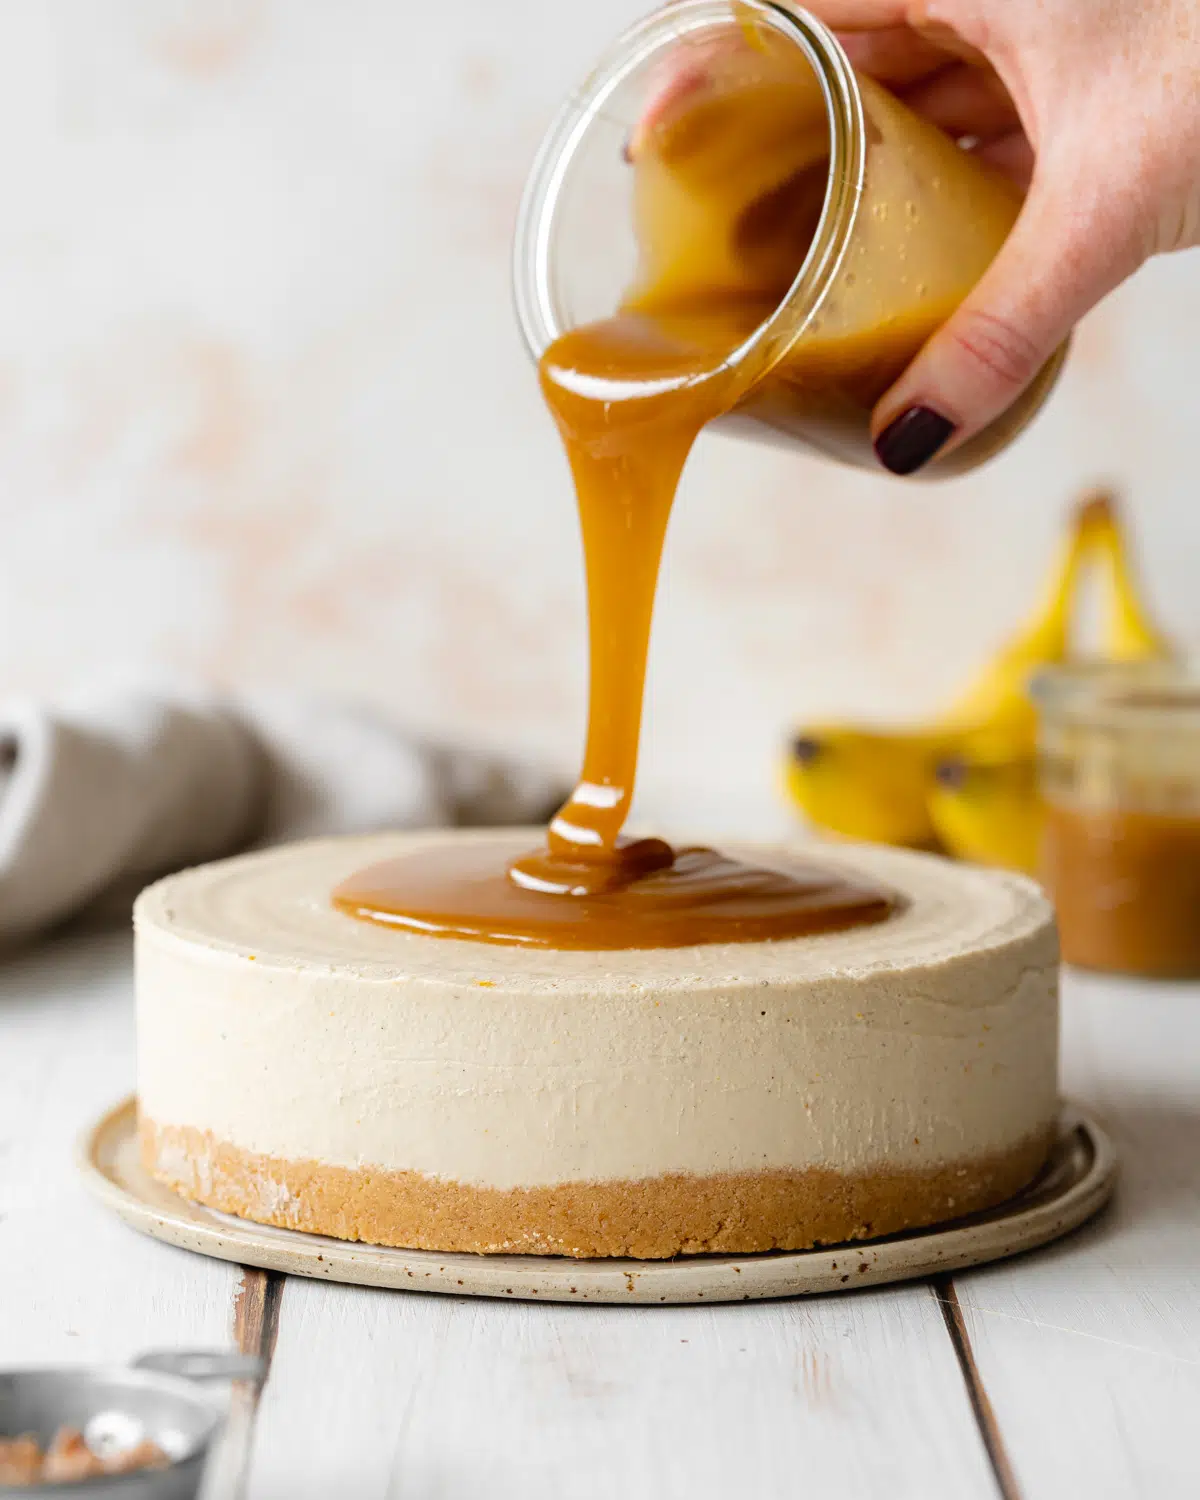 dairy free banana cheesecake with caramel sauce poured over it.